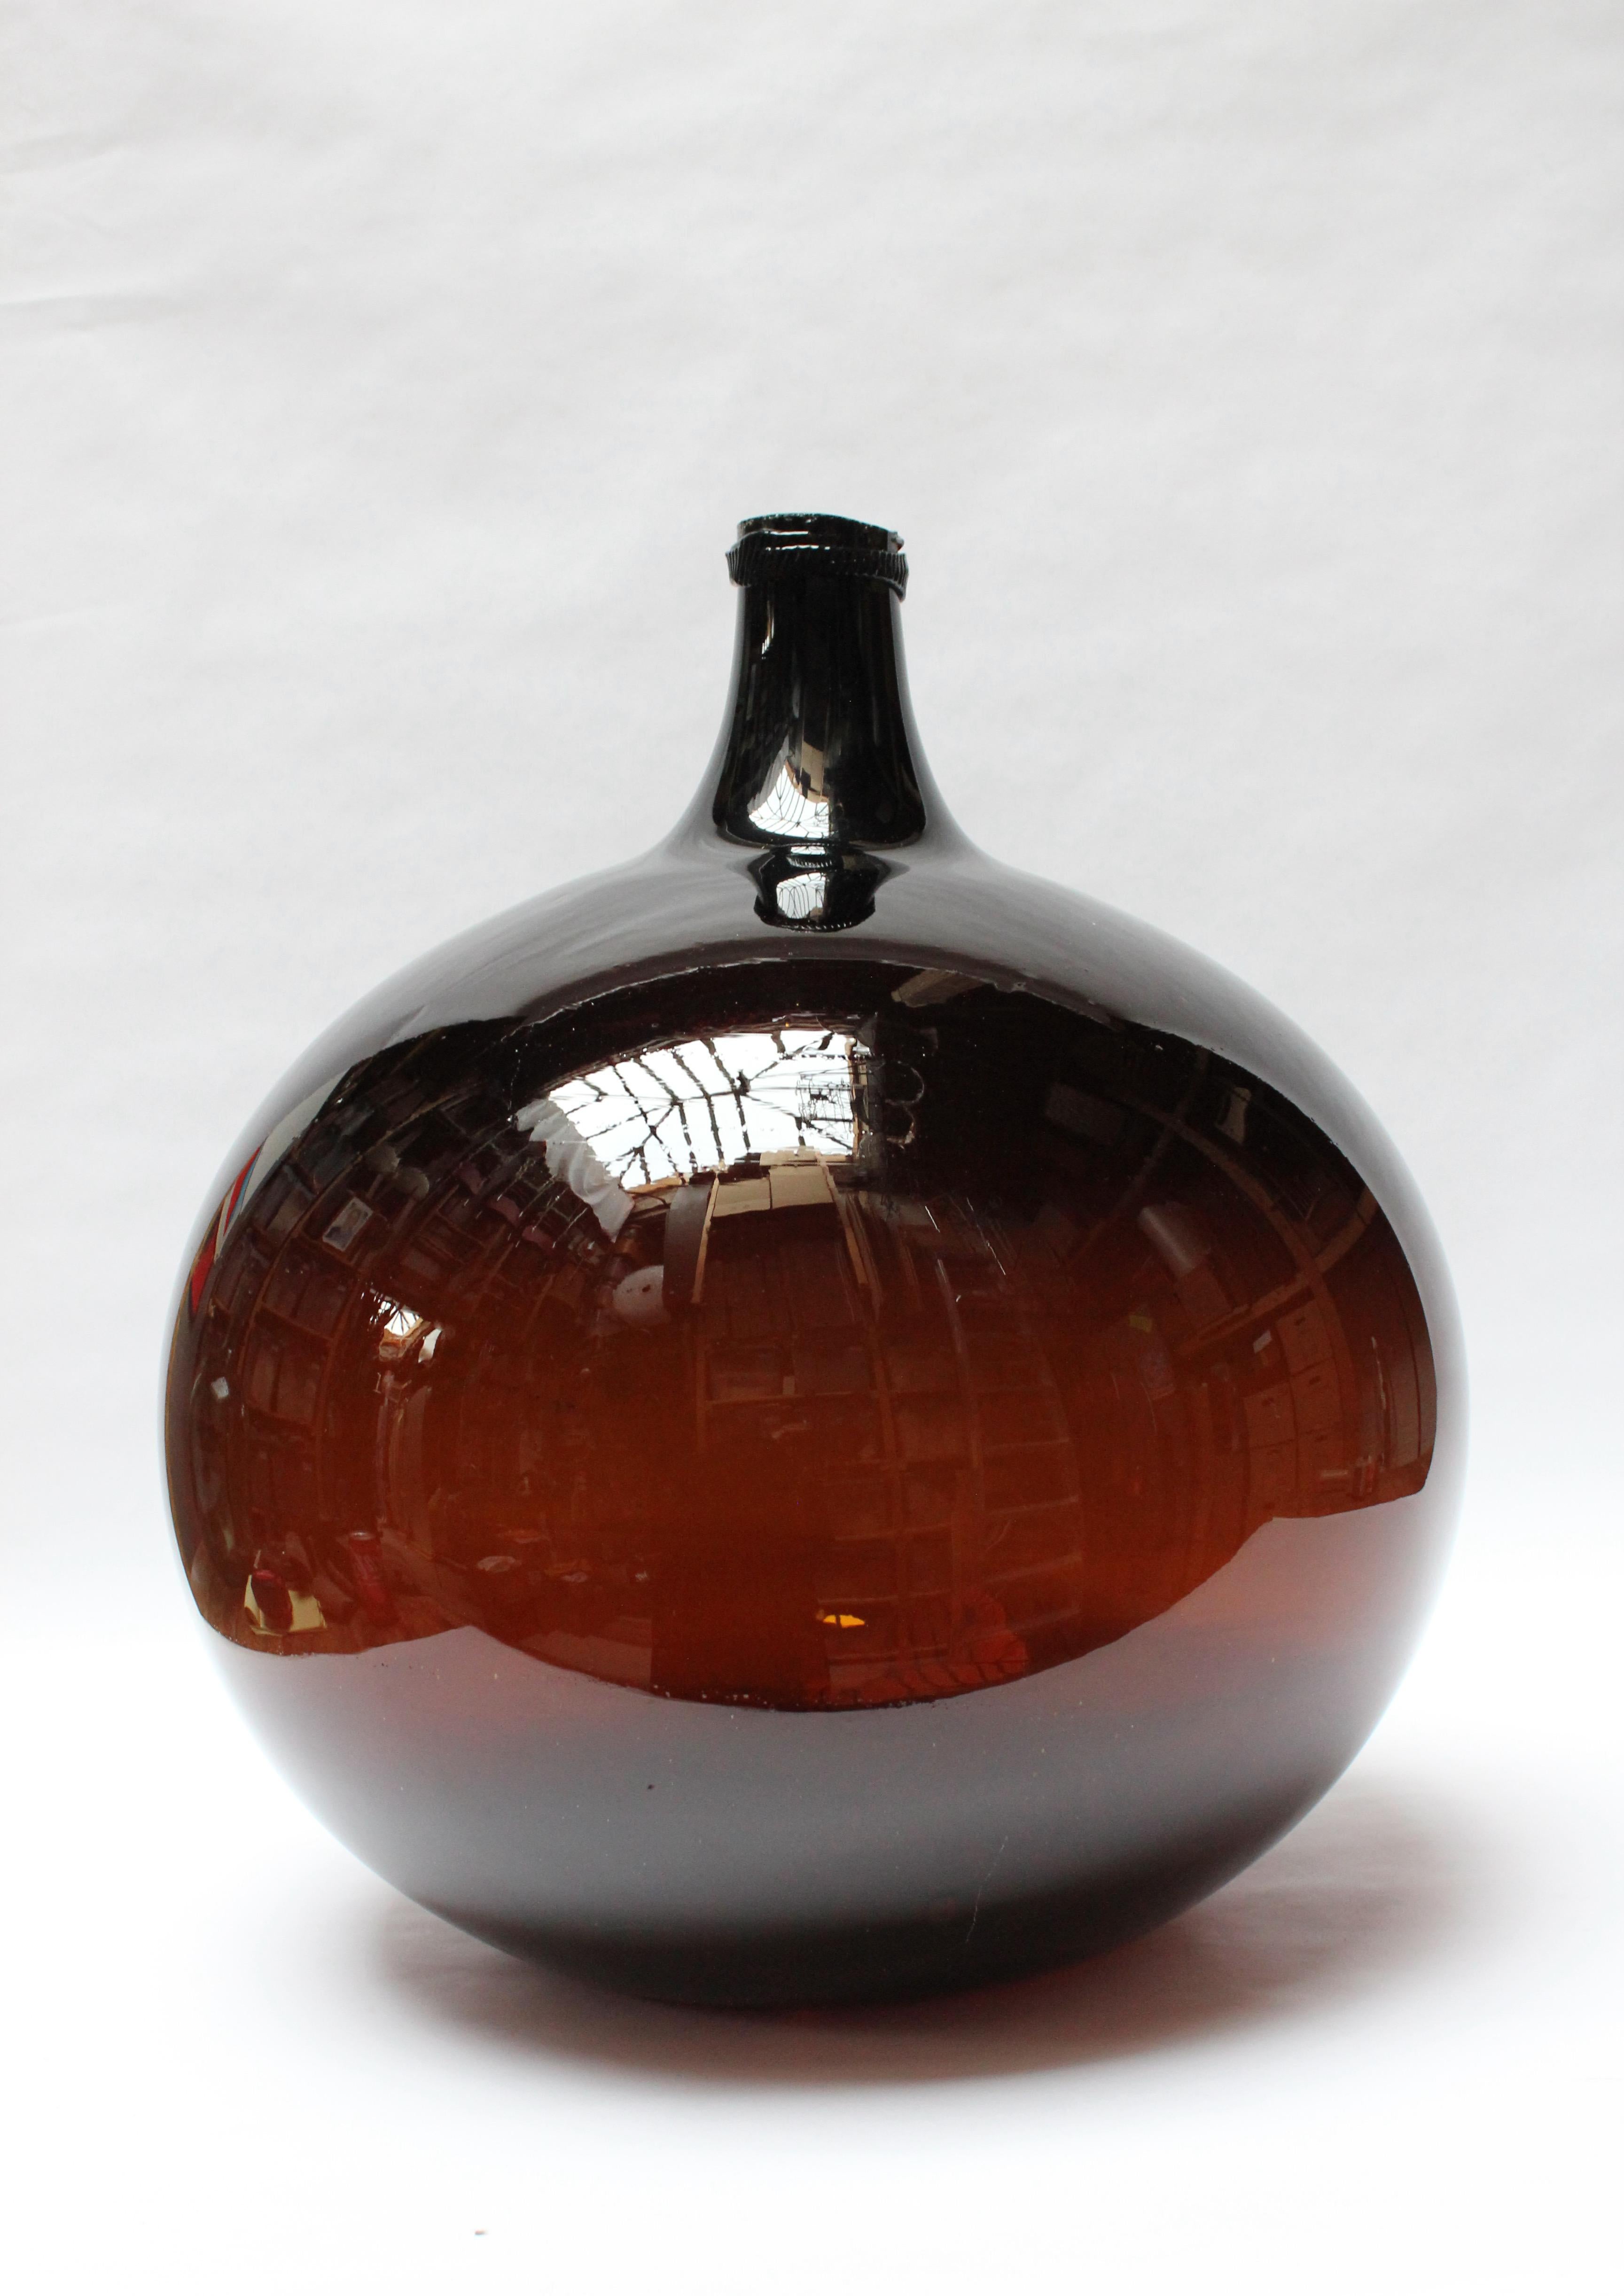 Impressive French Demijohn / Bonbonne Ambrée Brune originally used for transporting wine (ca. early 19th Century, France). Composed of free-blown amber glass exhibiting large air bubbles within the glass itself with a sheared lip and applied glass